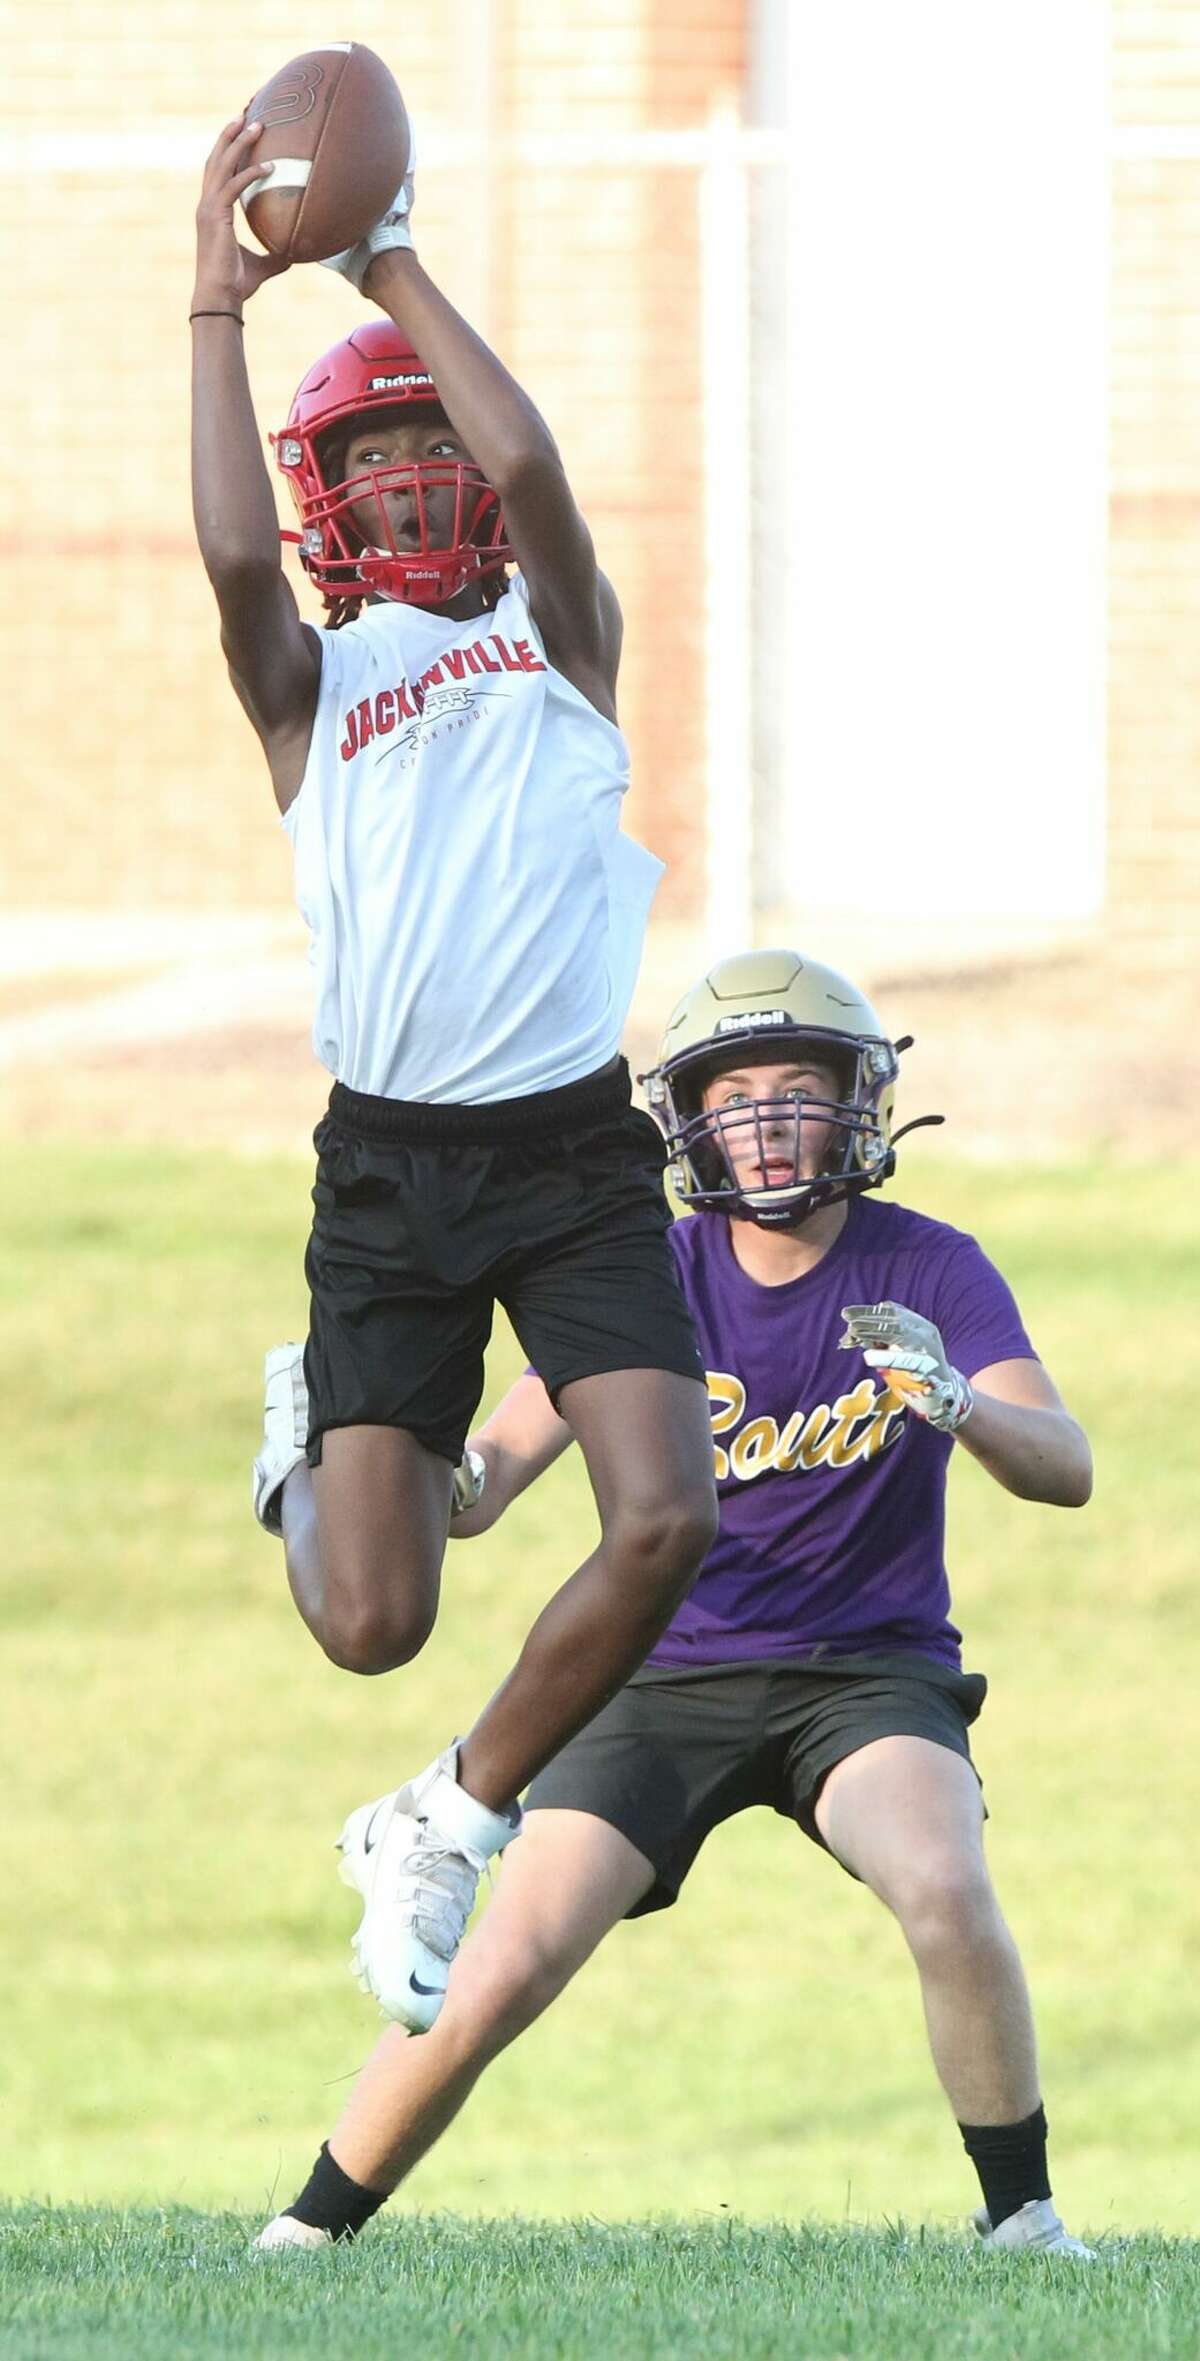 A Jacksonville receiver jumps high for a catch during a 7-on-7 with Routt at the JHS practice field on Wednesday night. More photos later.